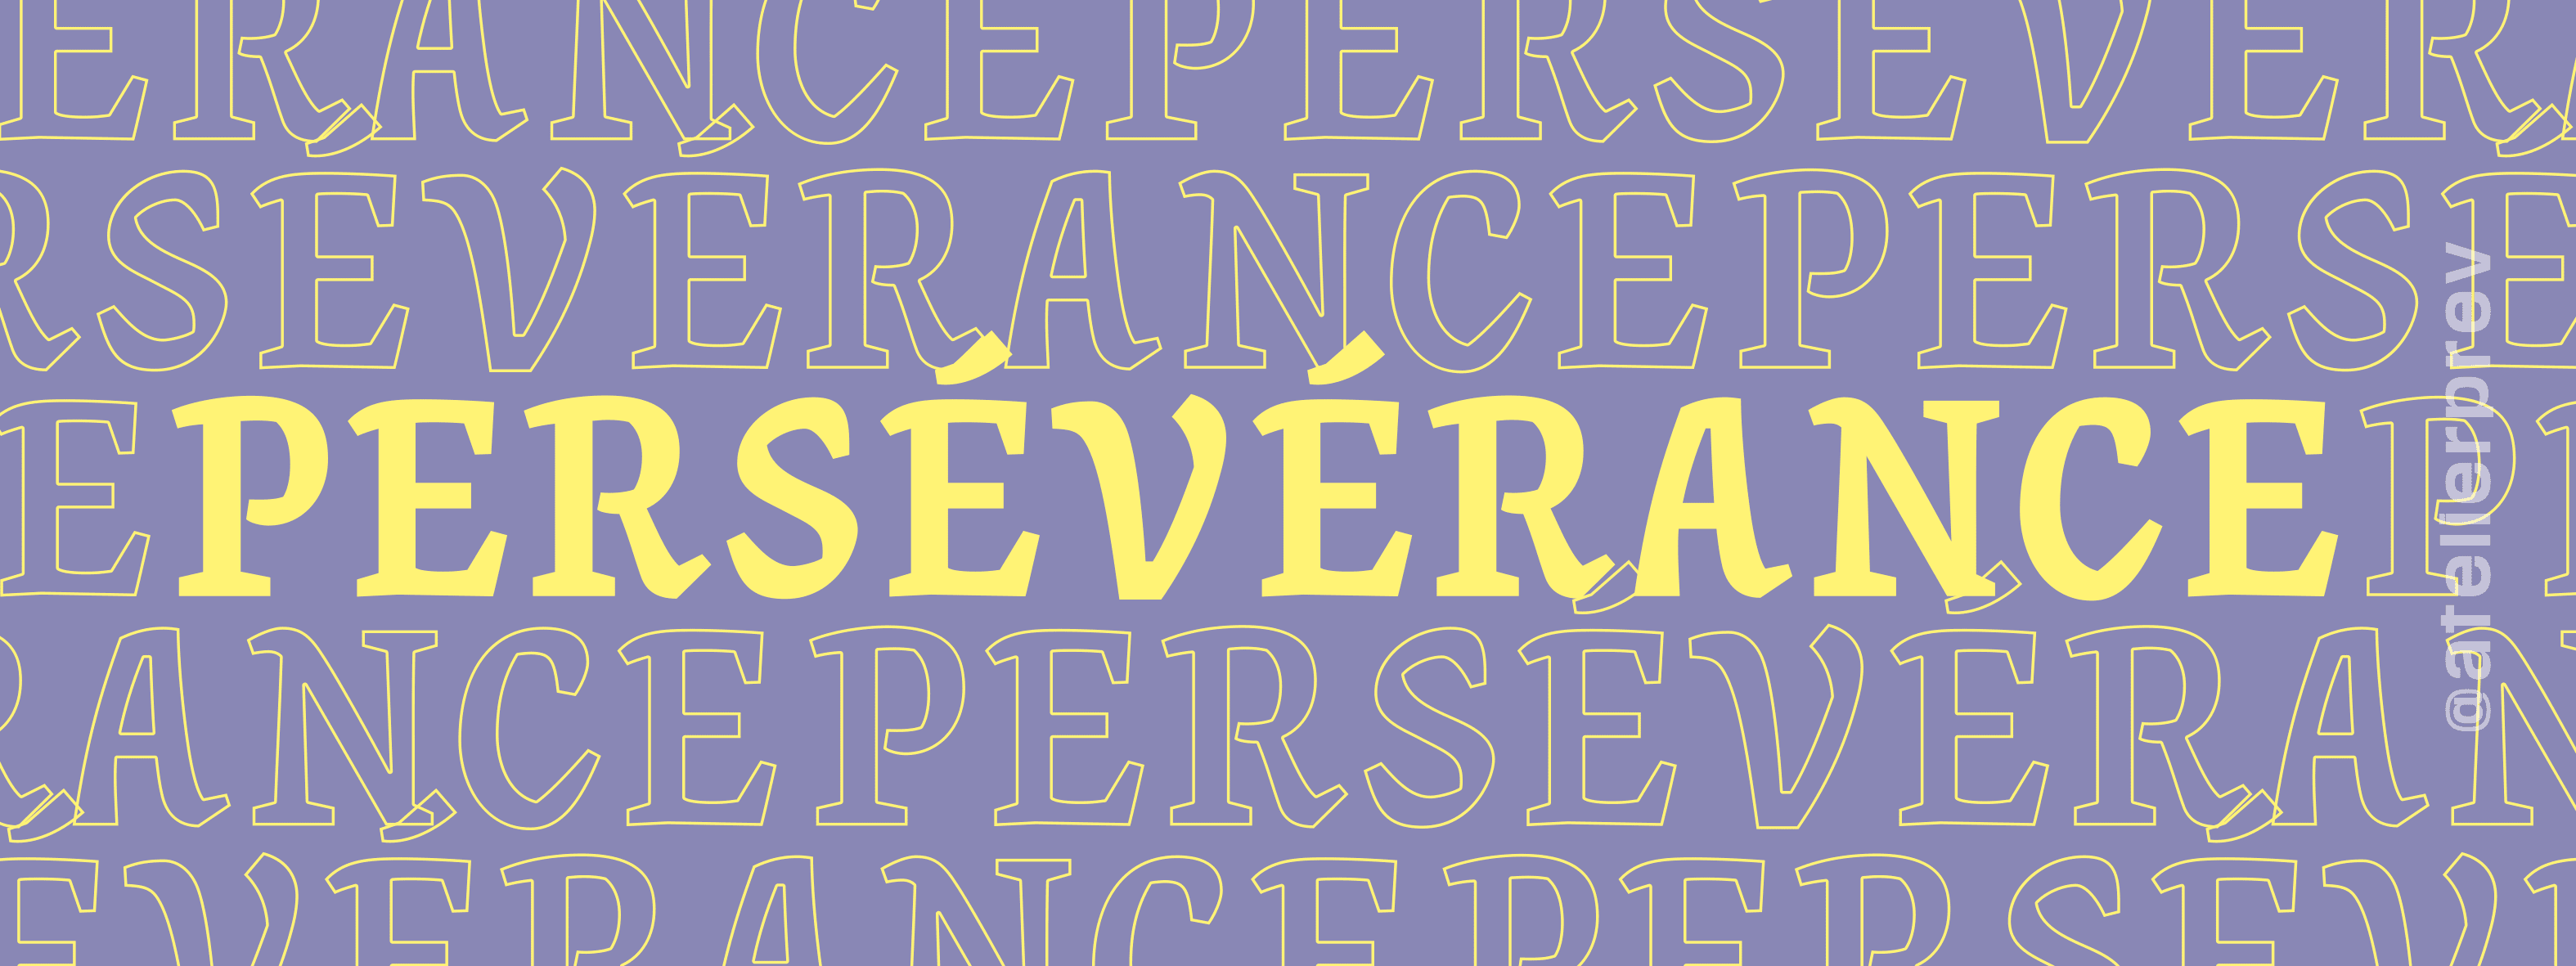 crips_sticker_forces_perseverance